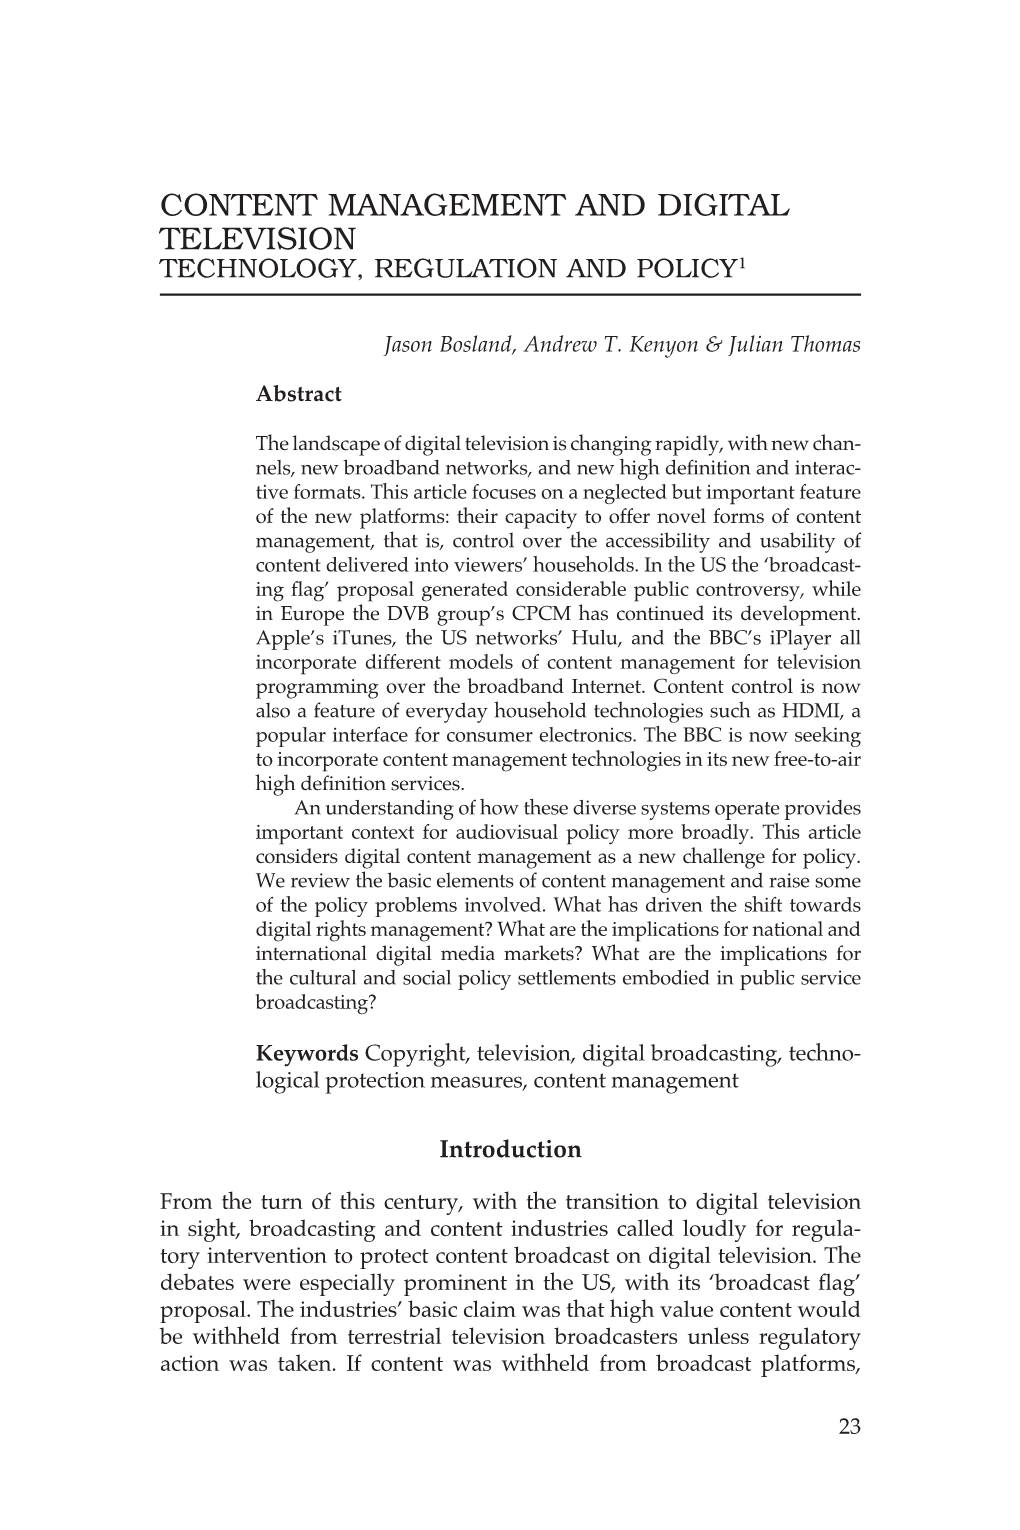 Content Management and Digital Television Technology, Regulation and Policy1